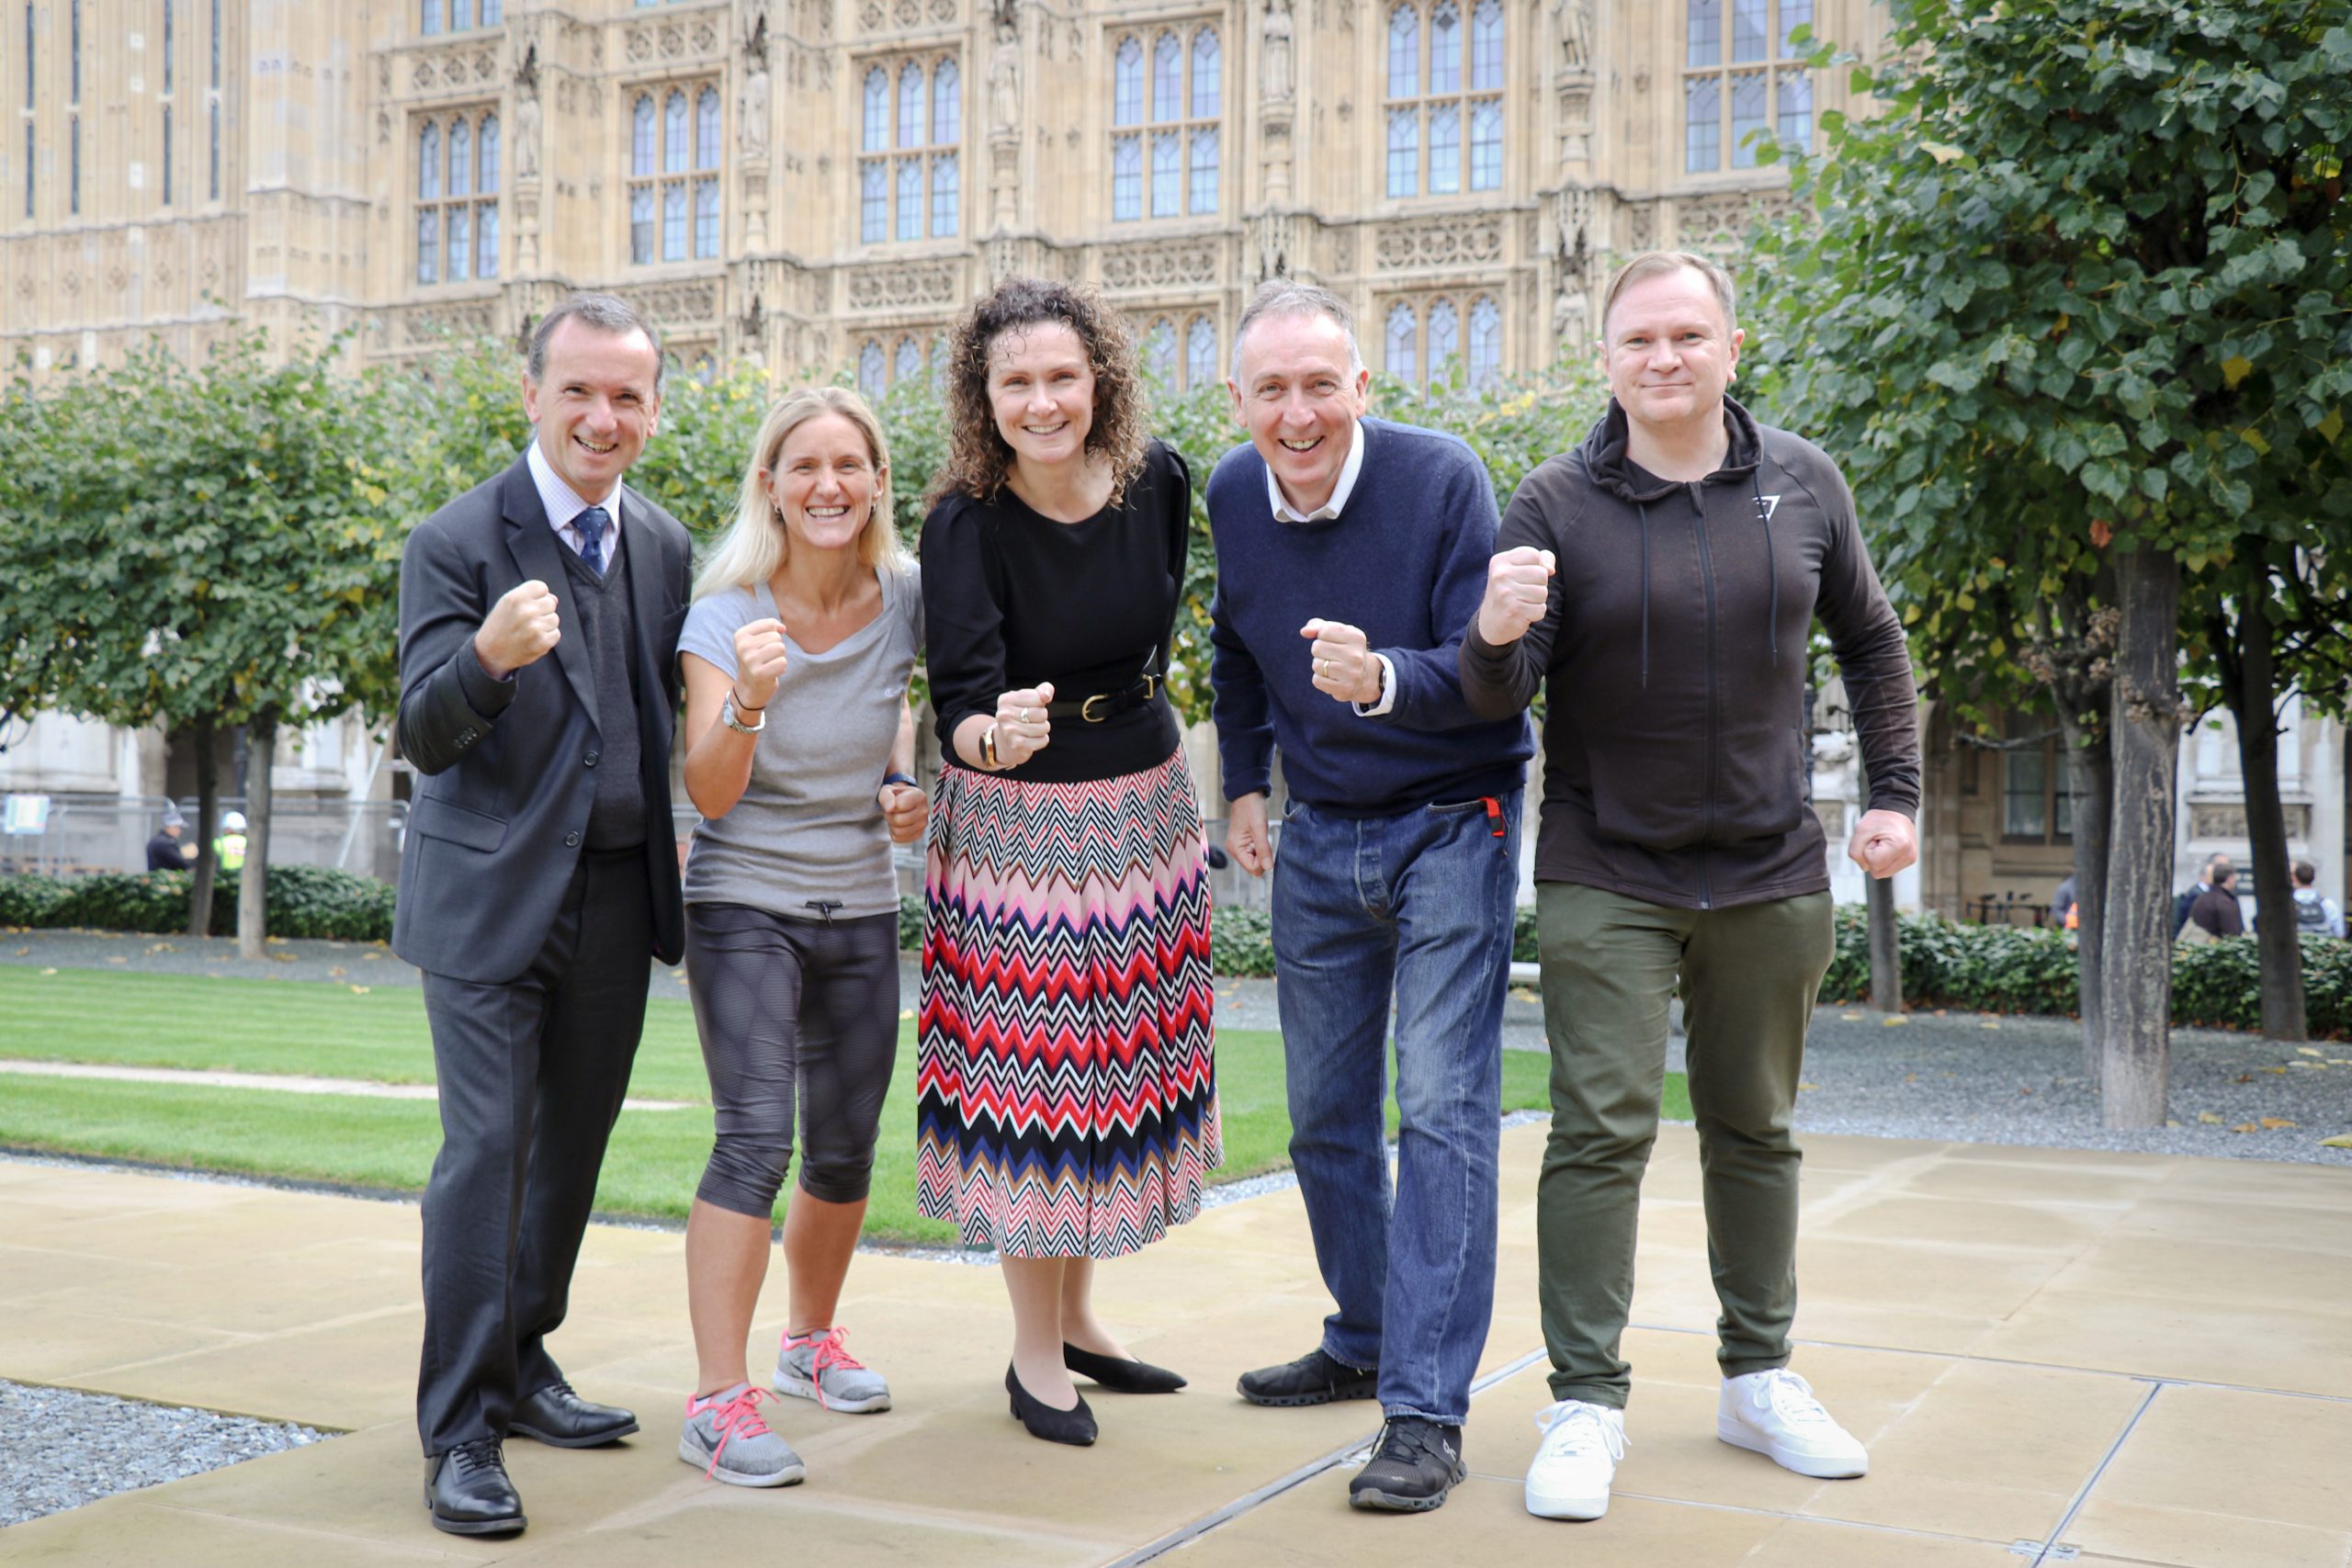 ukactive and Myzone call on politicians to prove they are ‘Fit for Office’ with physical activity challenge